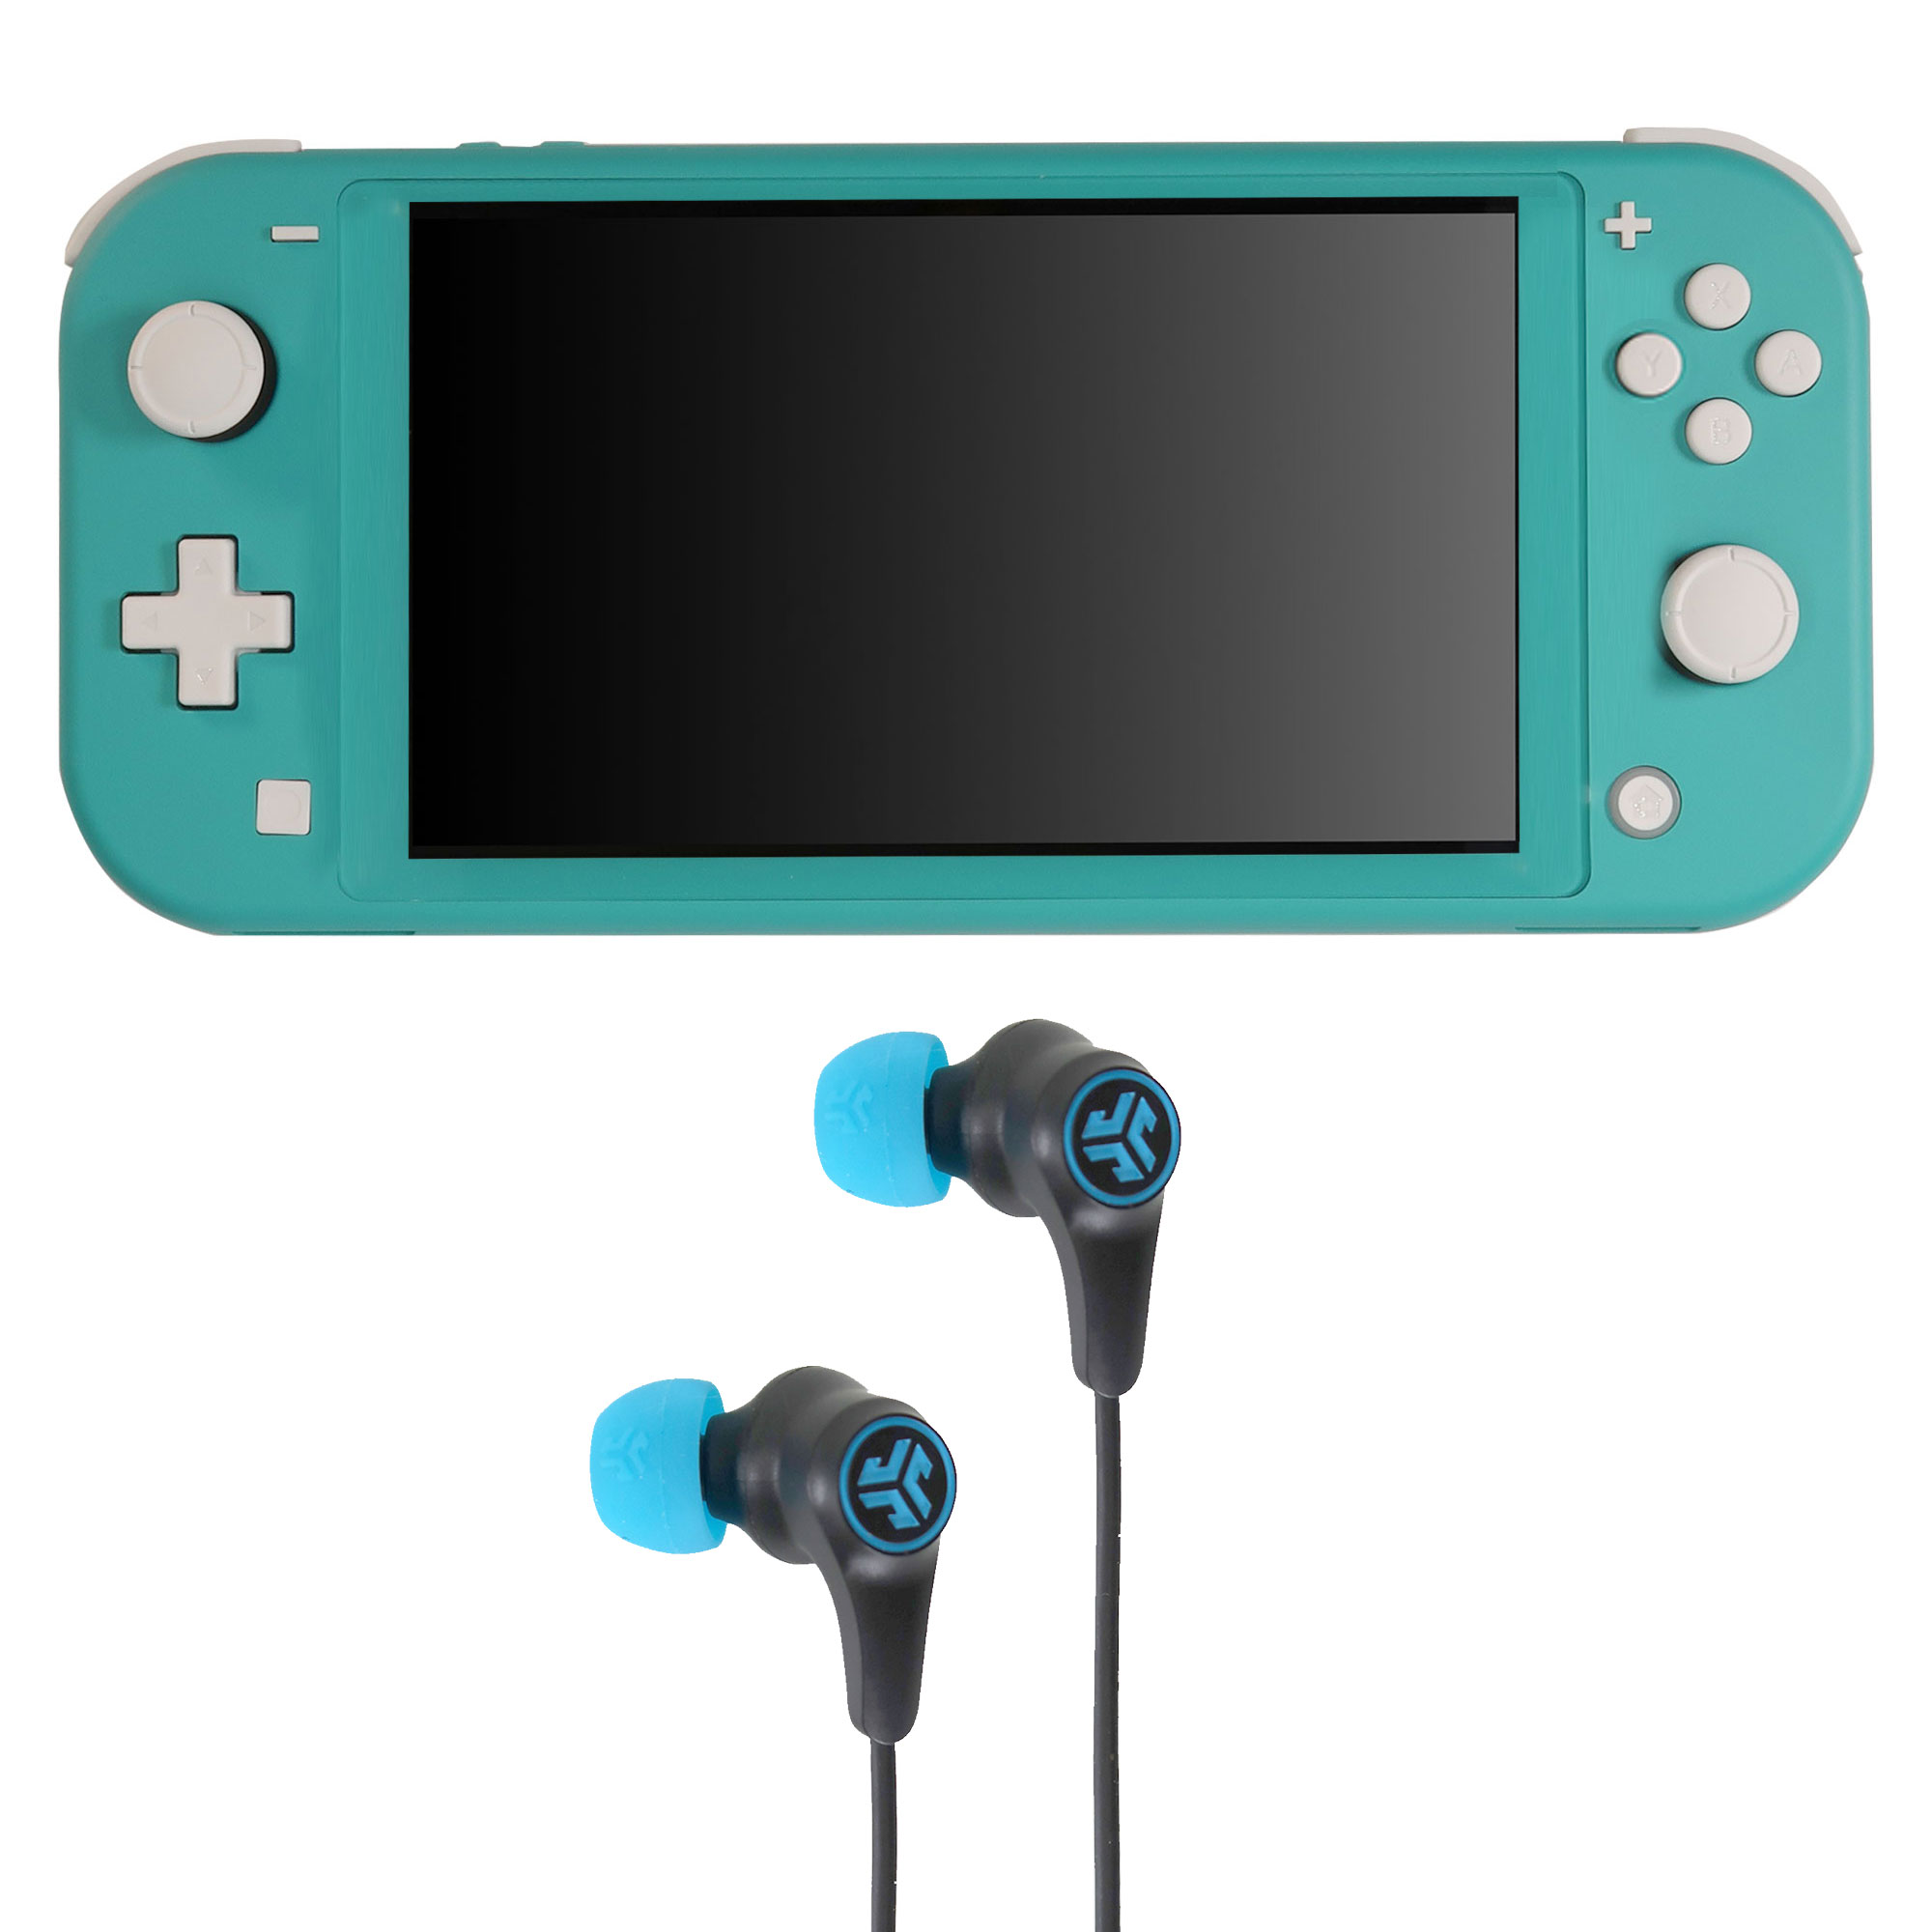 Nintendo Switch Lite (Turqoise) with JLab Play Gaming Wireless Bluetooth Earbuds - Black/Blue